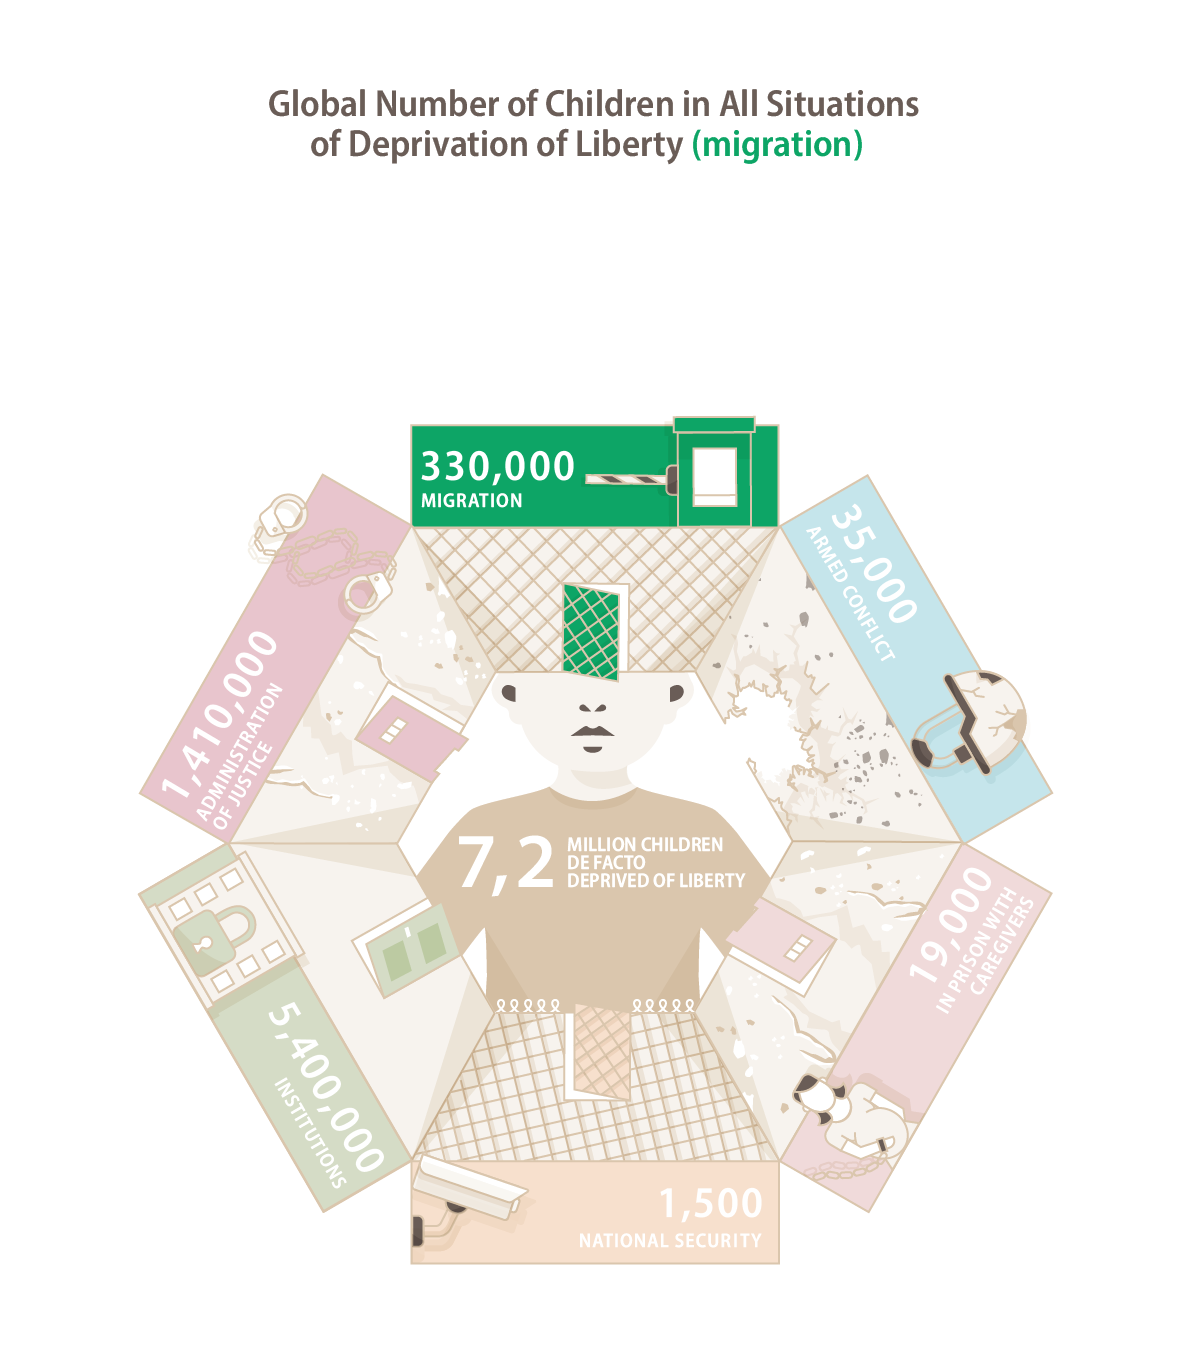 Global Number of Children in All Situations of Deprivation of Liberty (migration)